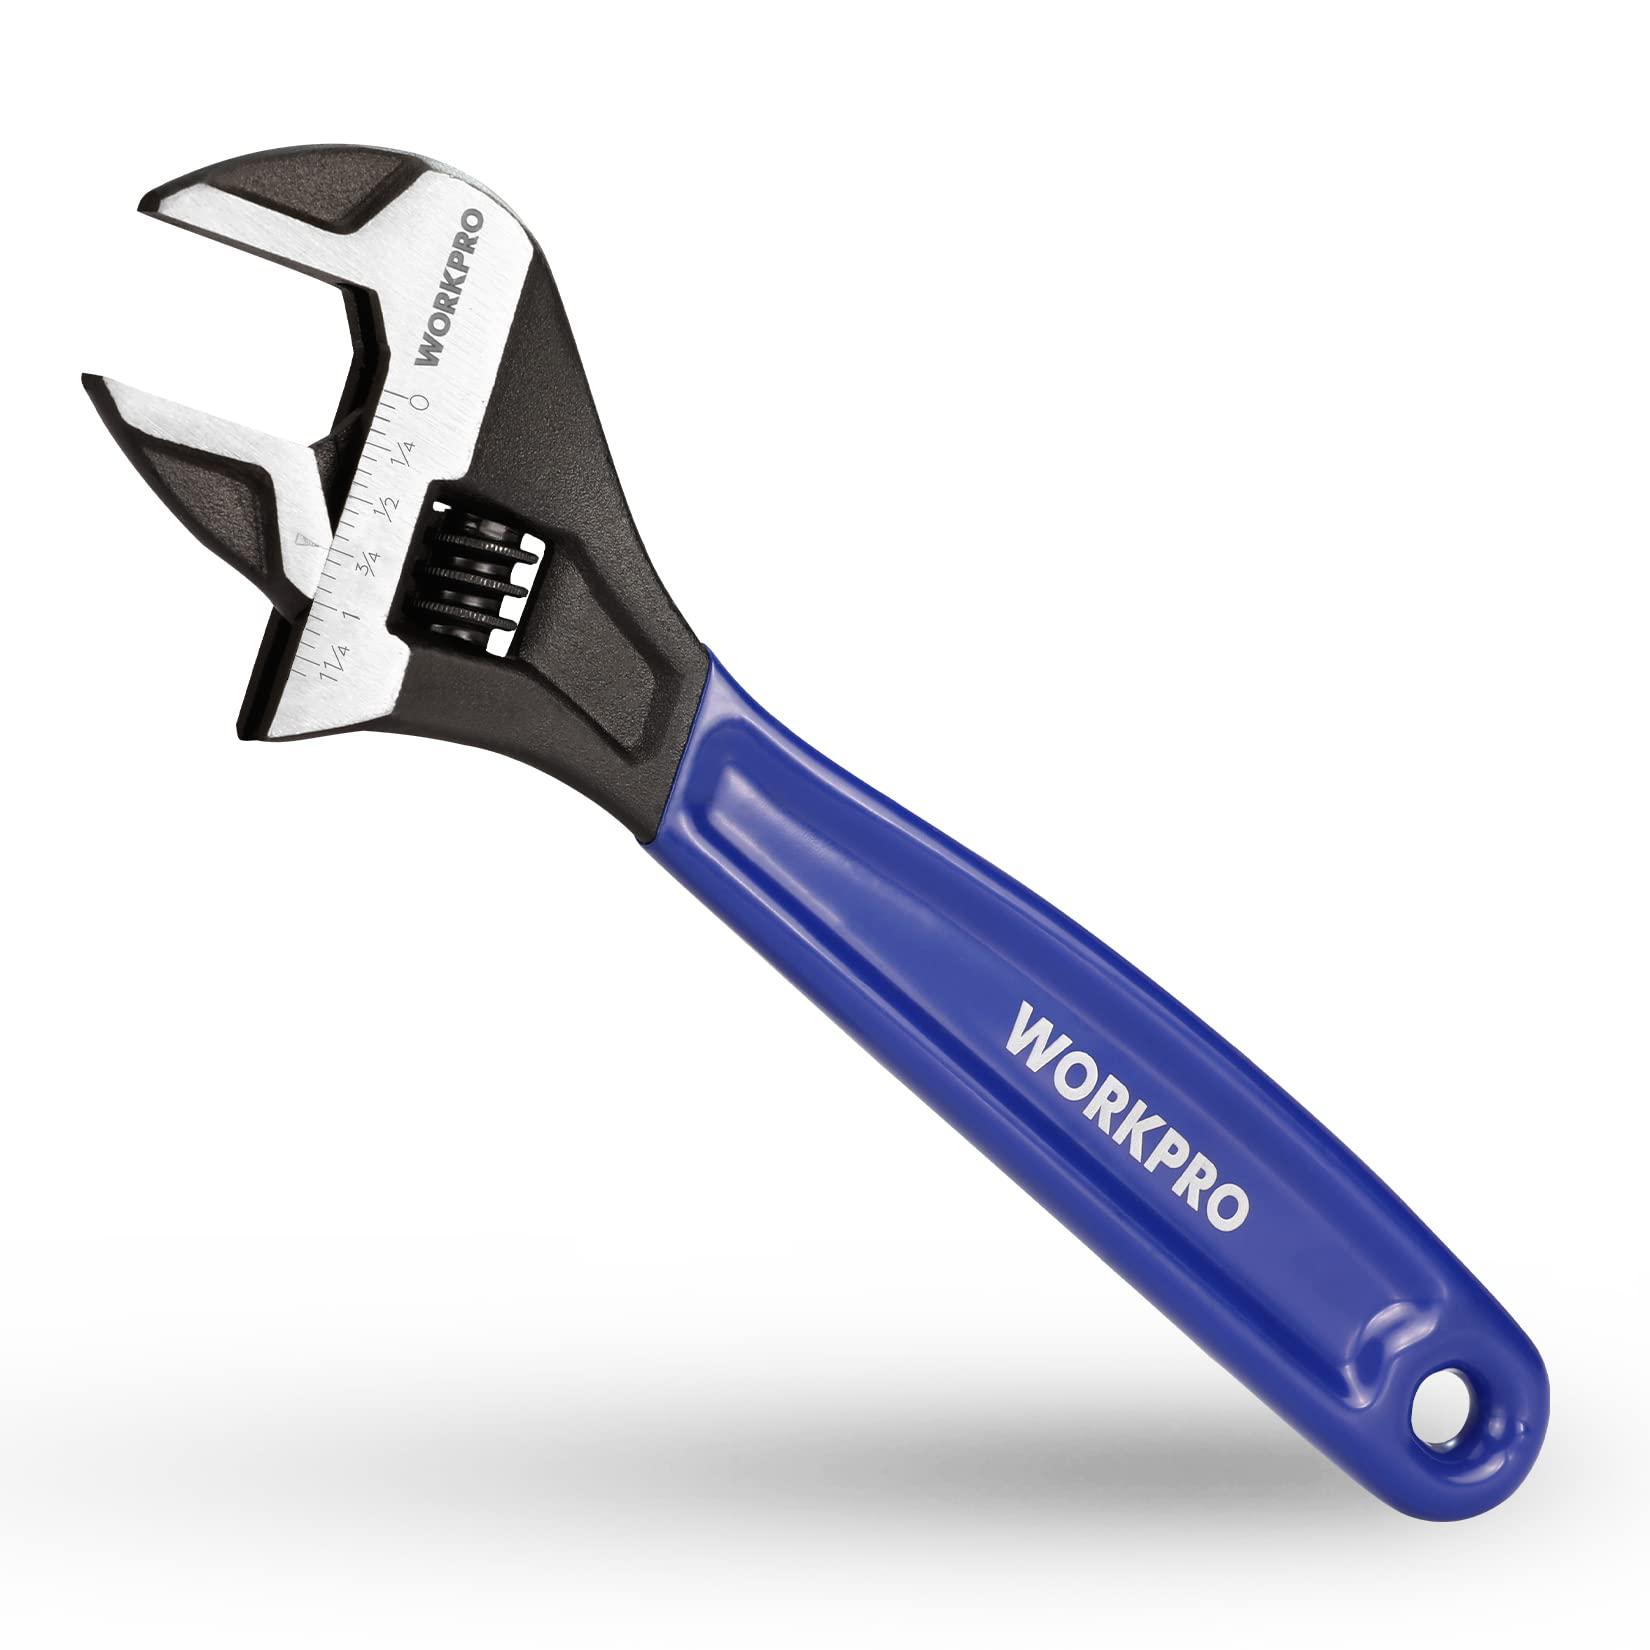 workpro 10-inch adjustable wrench, cr-v steel wrench with cushion grip, wide jaw black oxide wrench, metric & sae scales, for